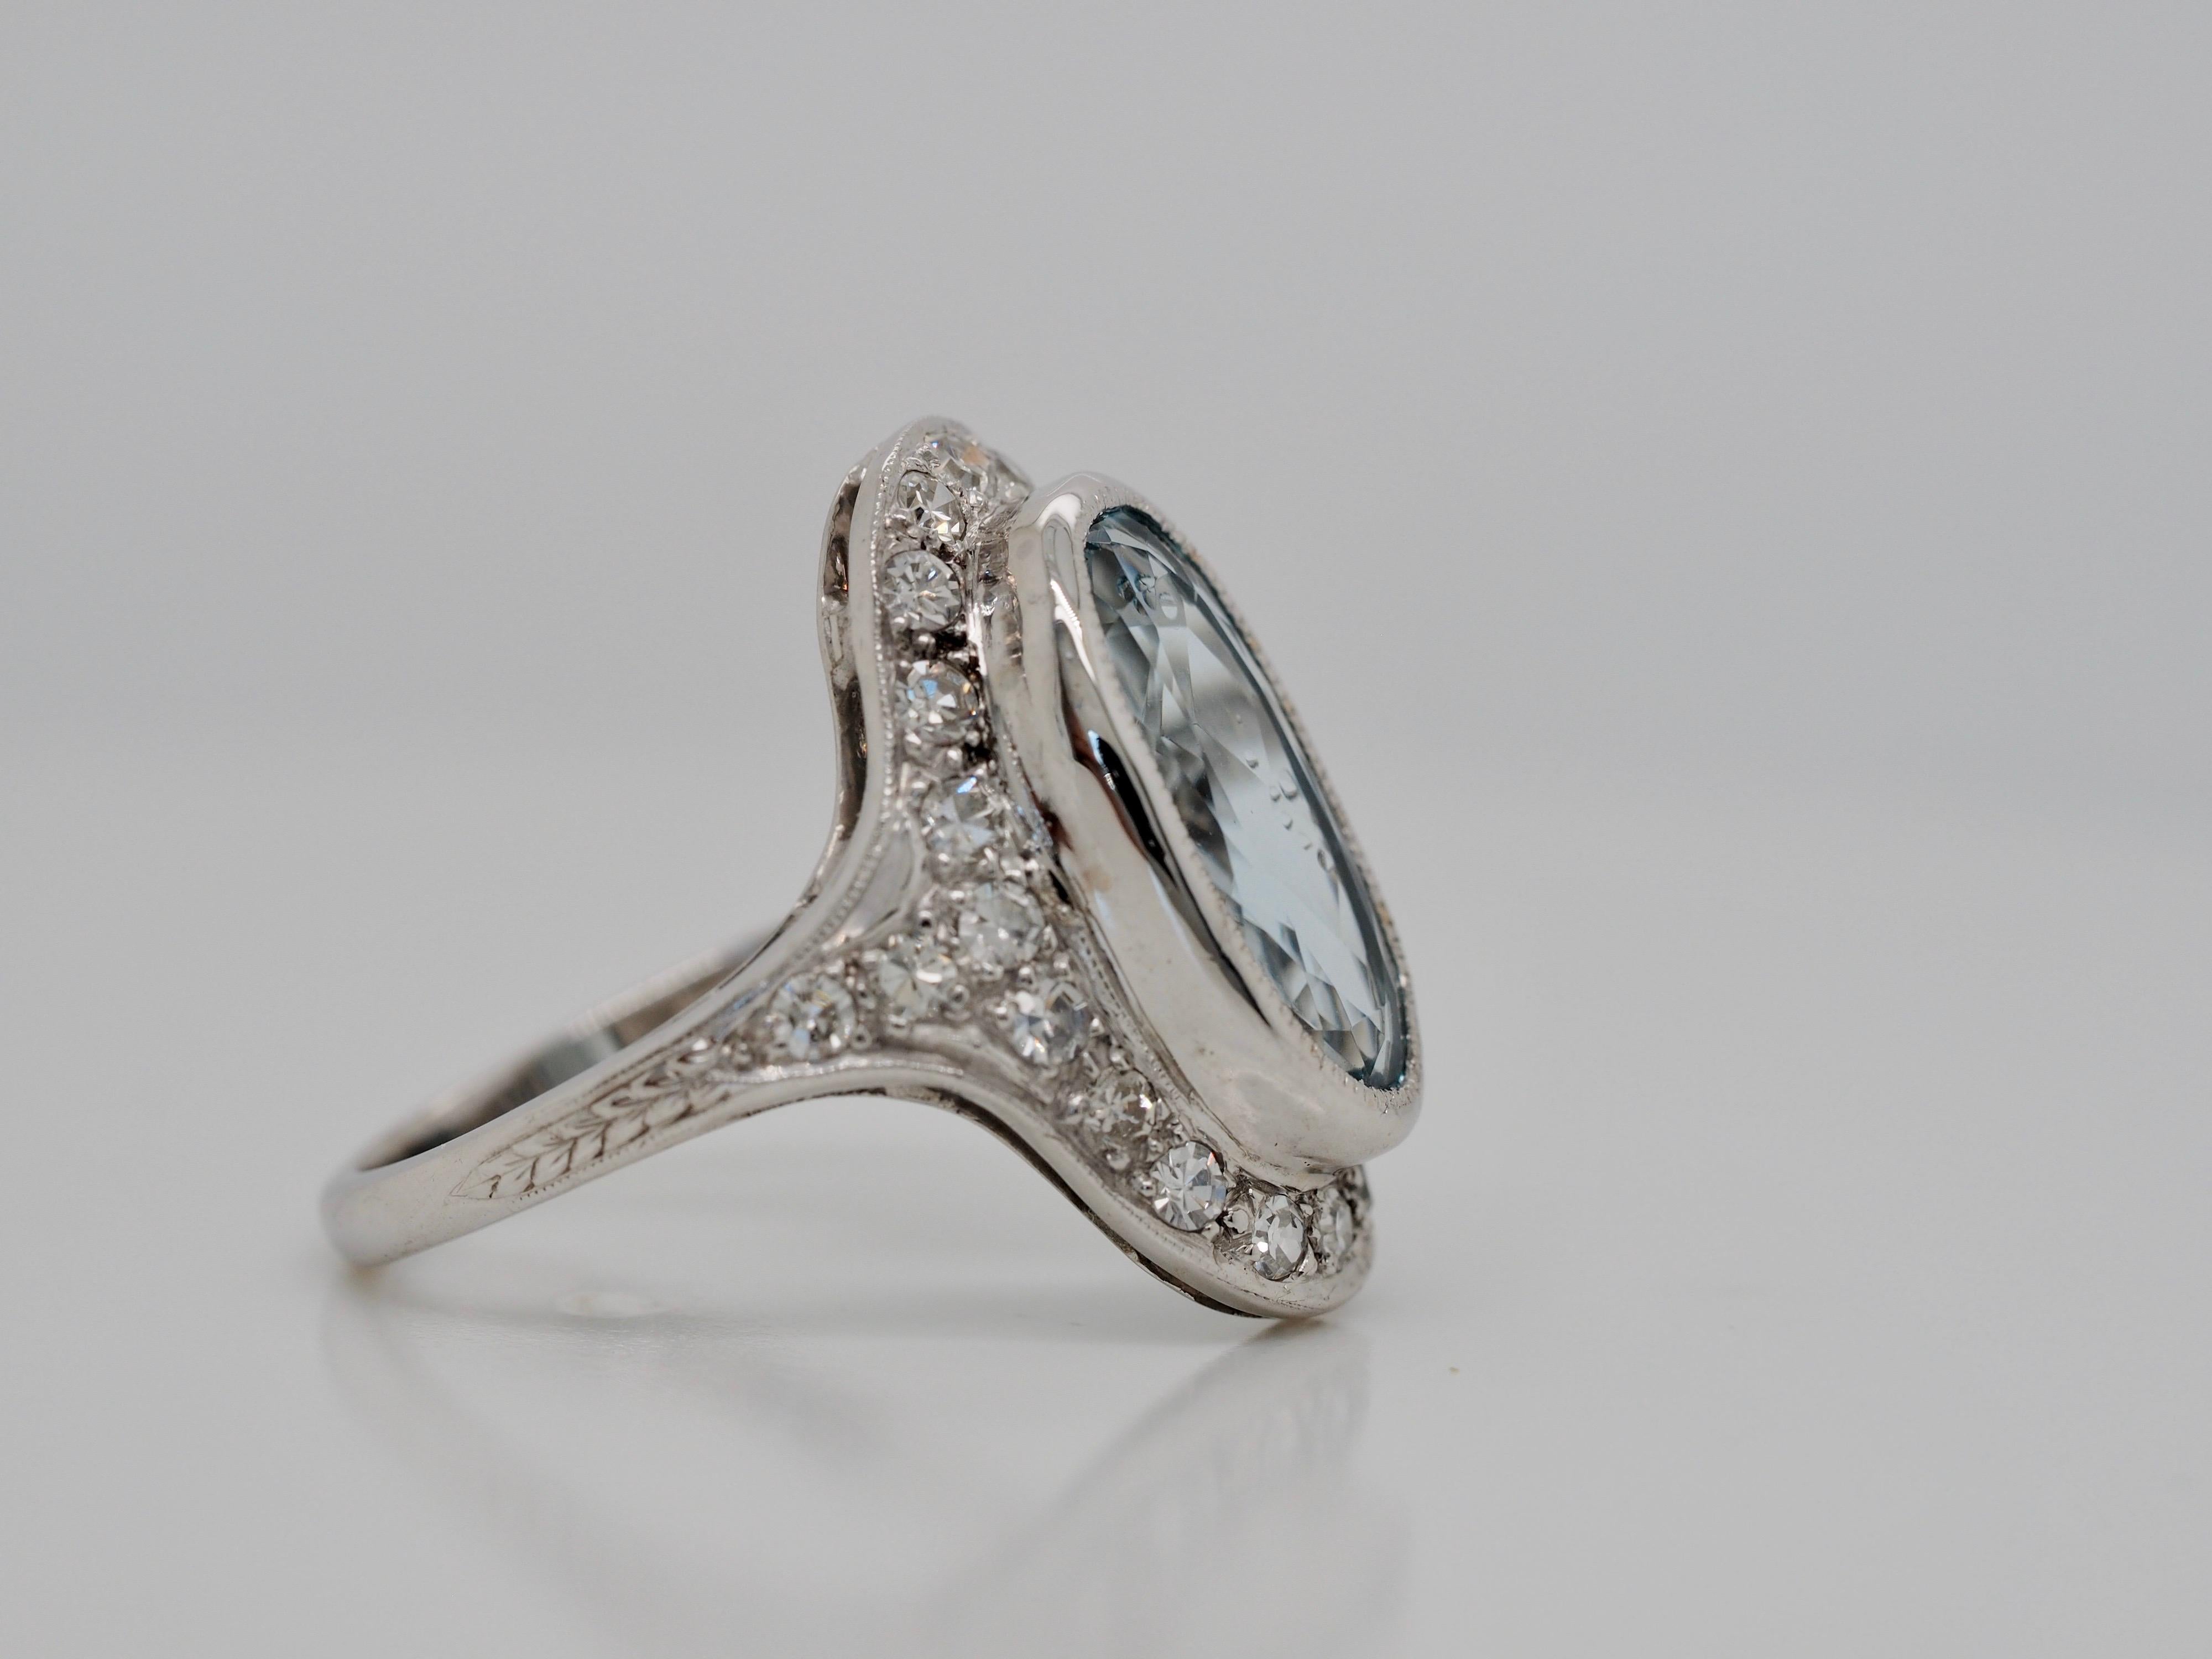 This Vintage Art Deco Aquamarine ring is a dream, dating back to the 1930's stamped 